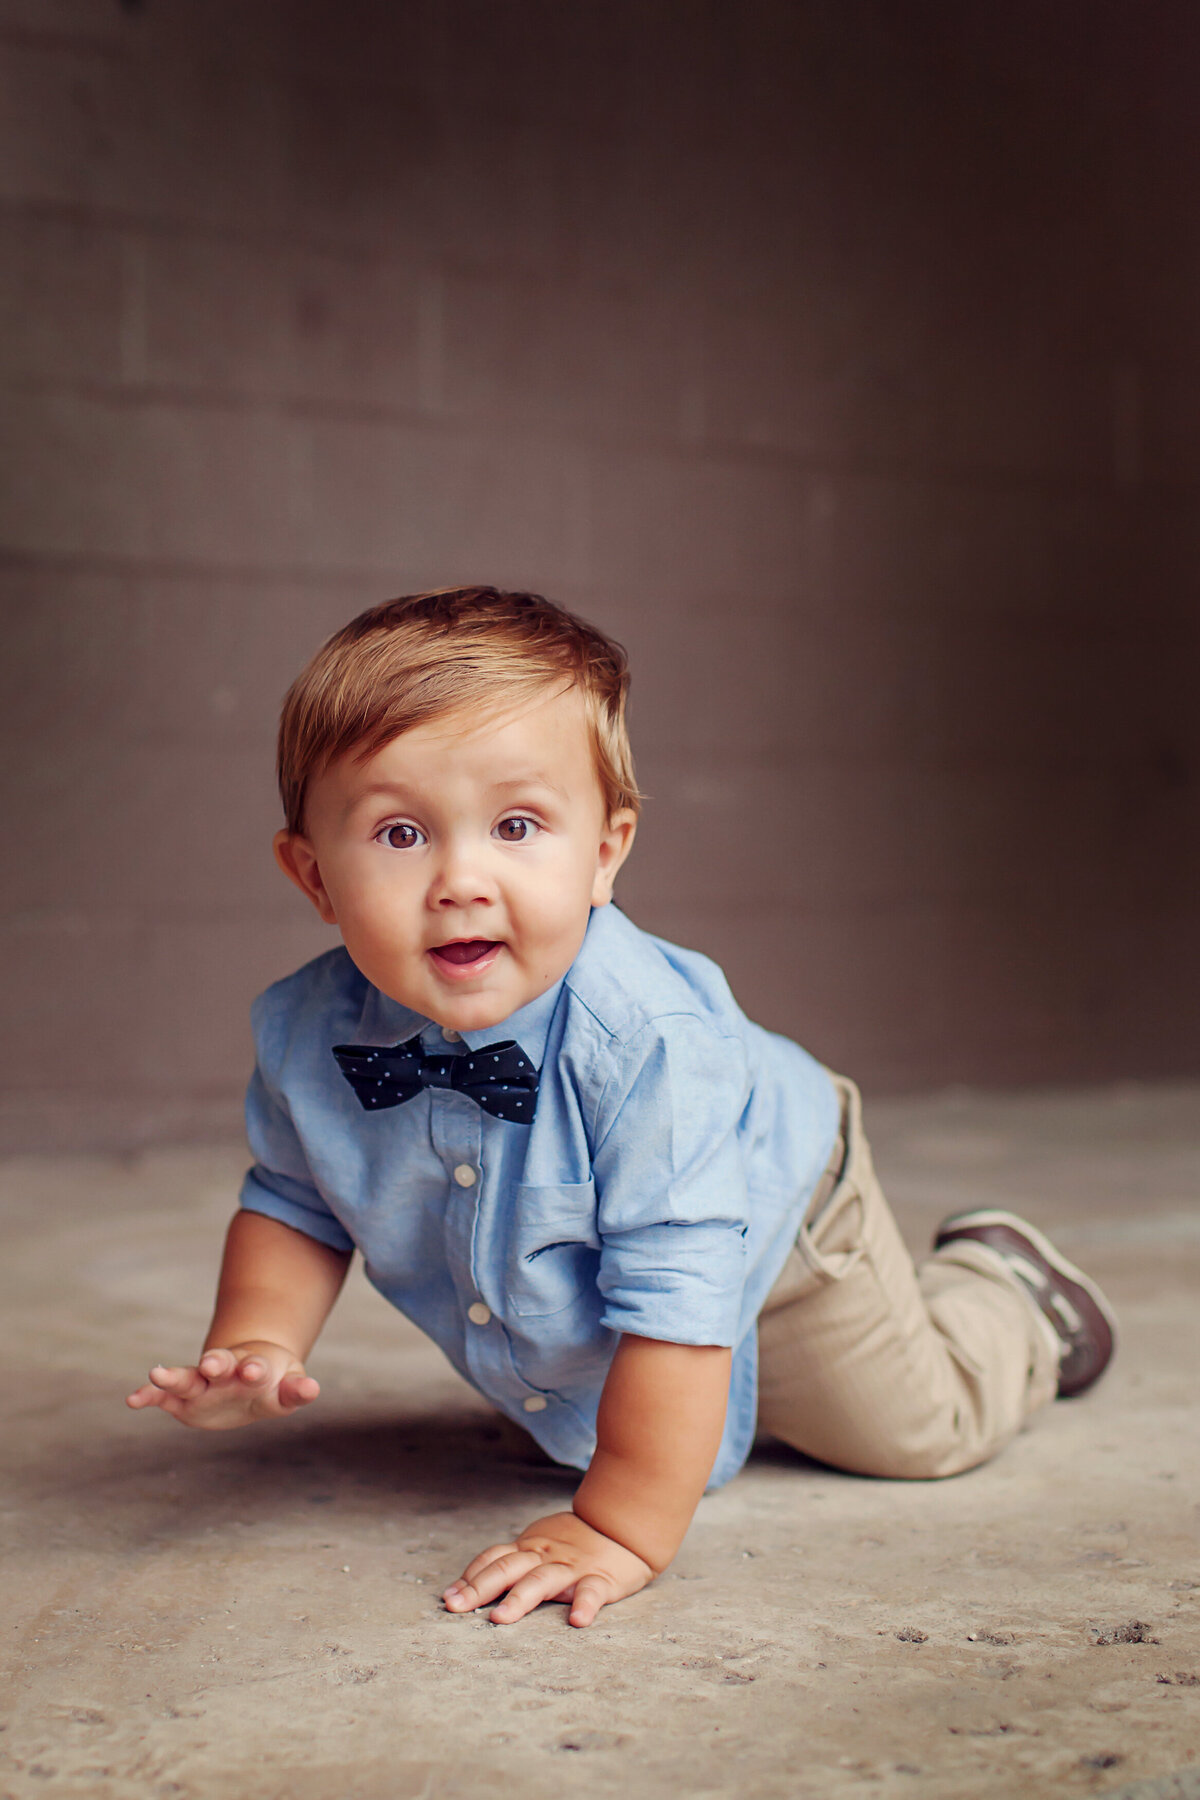 Cute little boy crawling on concrete with cubby arms and big brown eyes smiling at the camera.